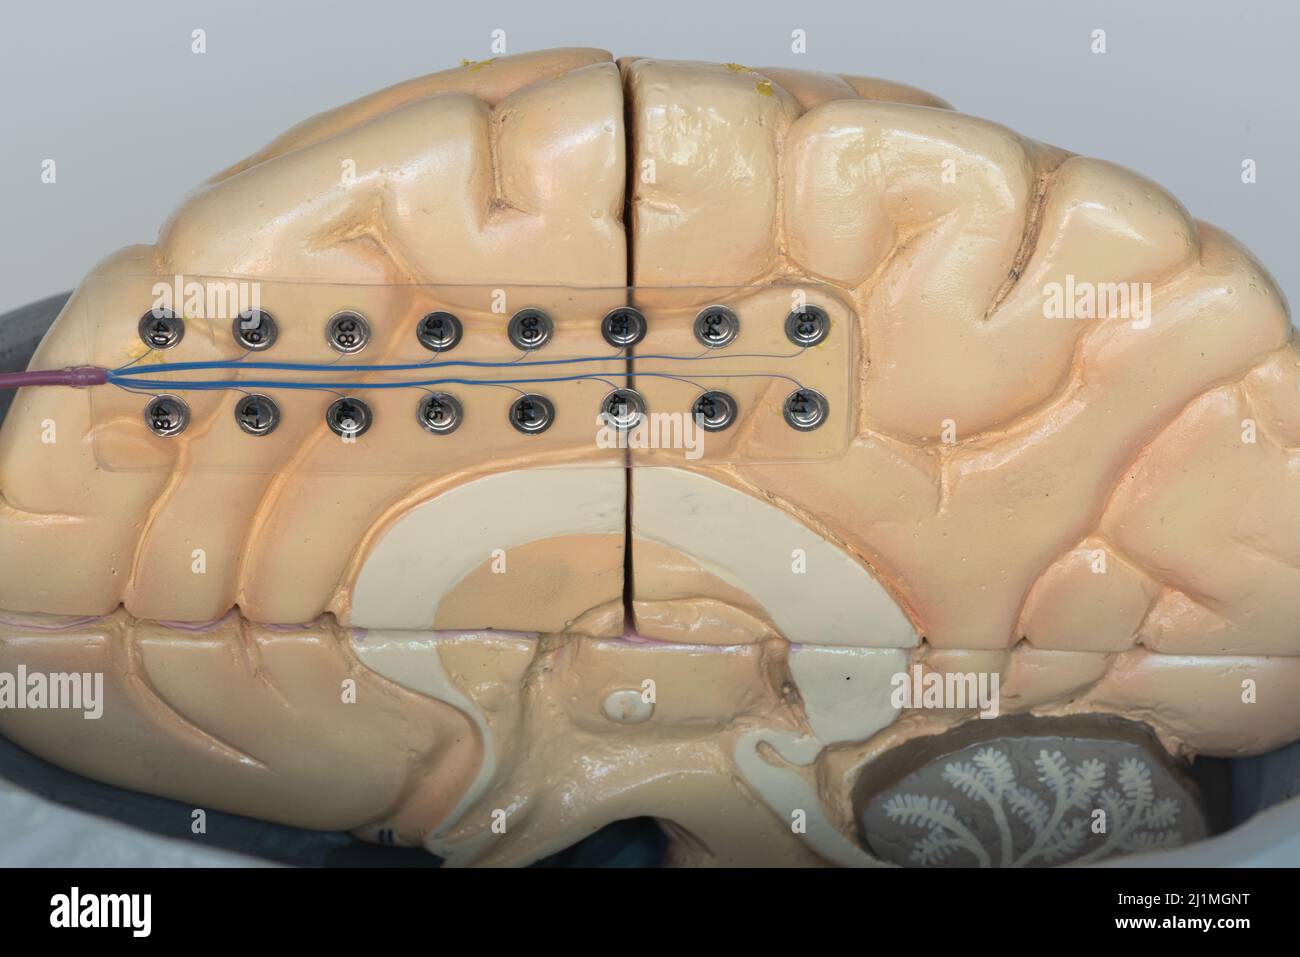 Close-up view of subdural electrode for recording brain waves or electroencephalography on medial surface of cerebral hemisphere. Stock Photo